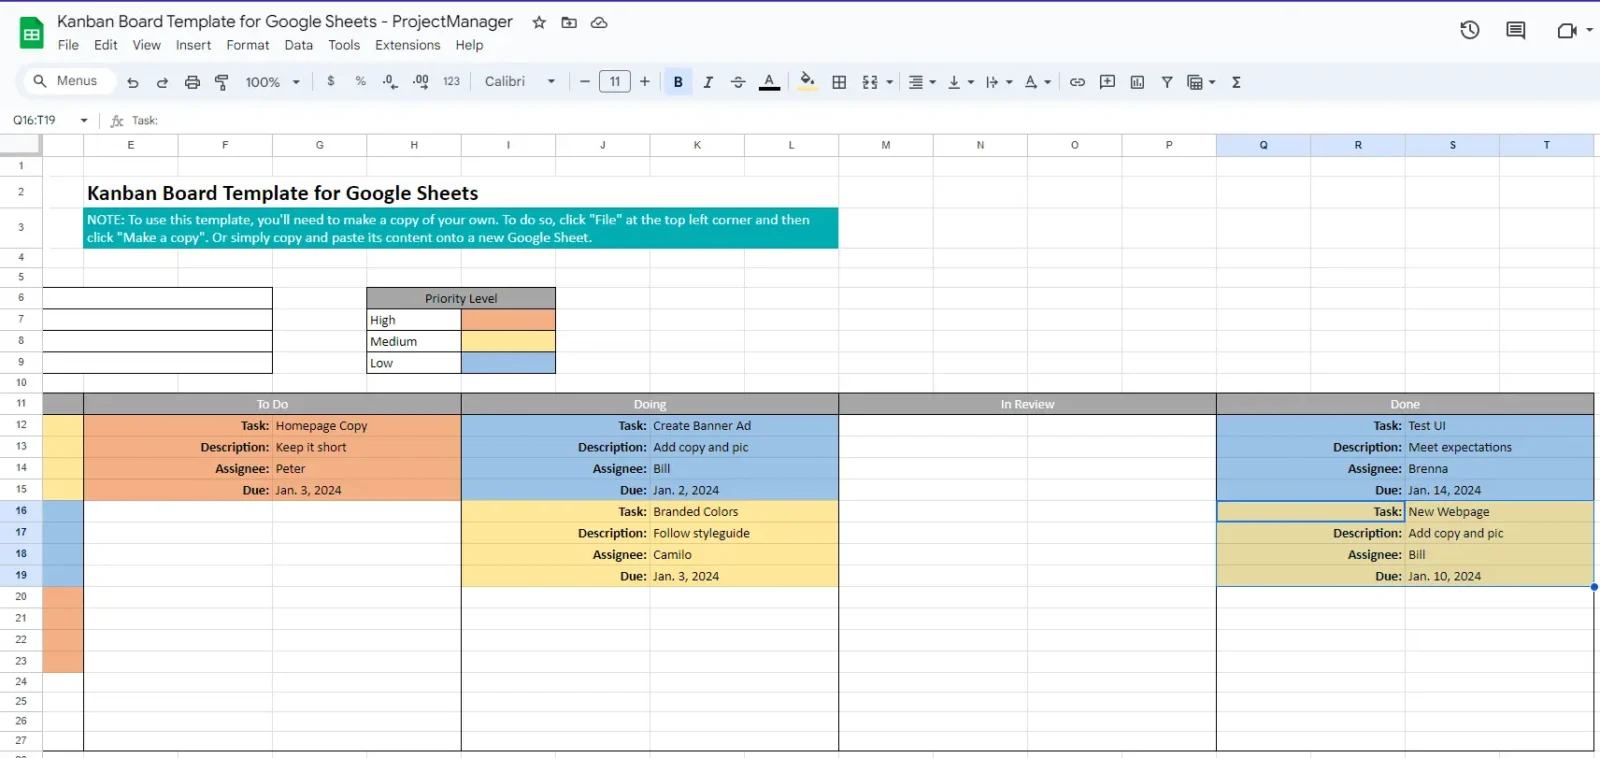 Final step to move a kanban card in the kanban board for Google Sheets by ProjectManager